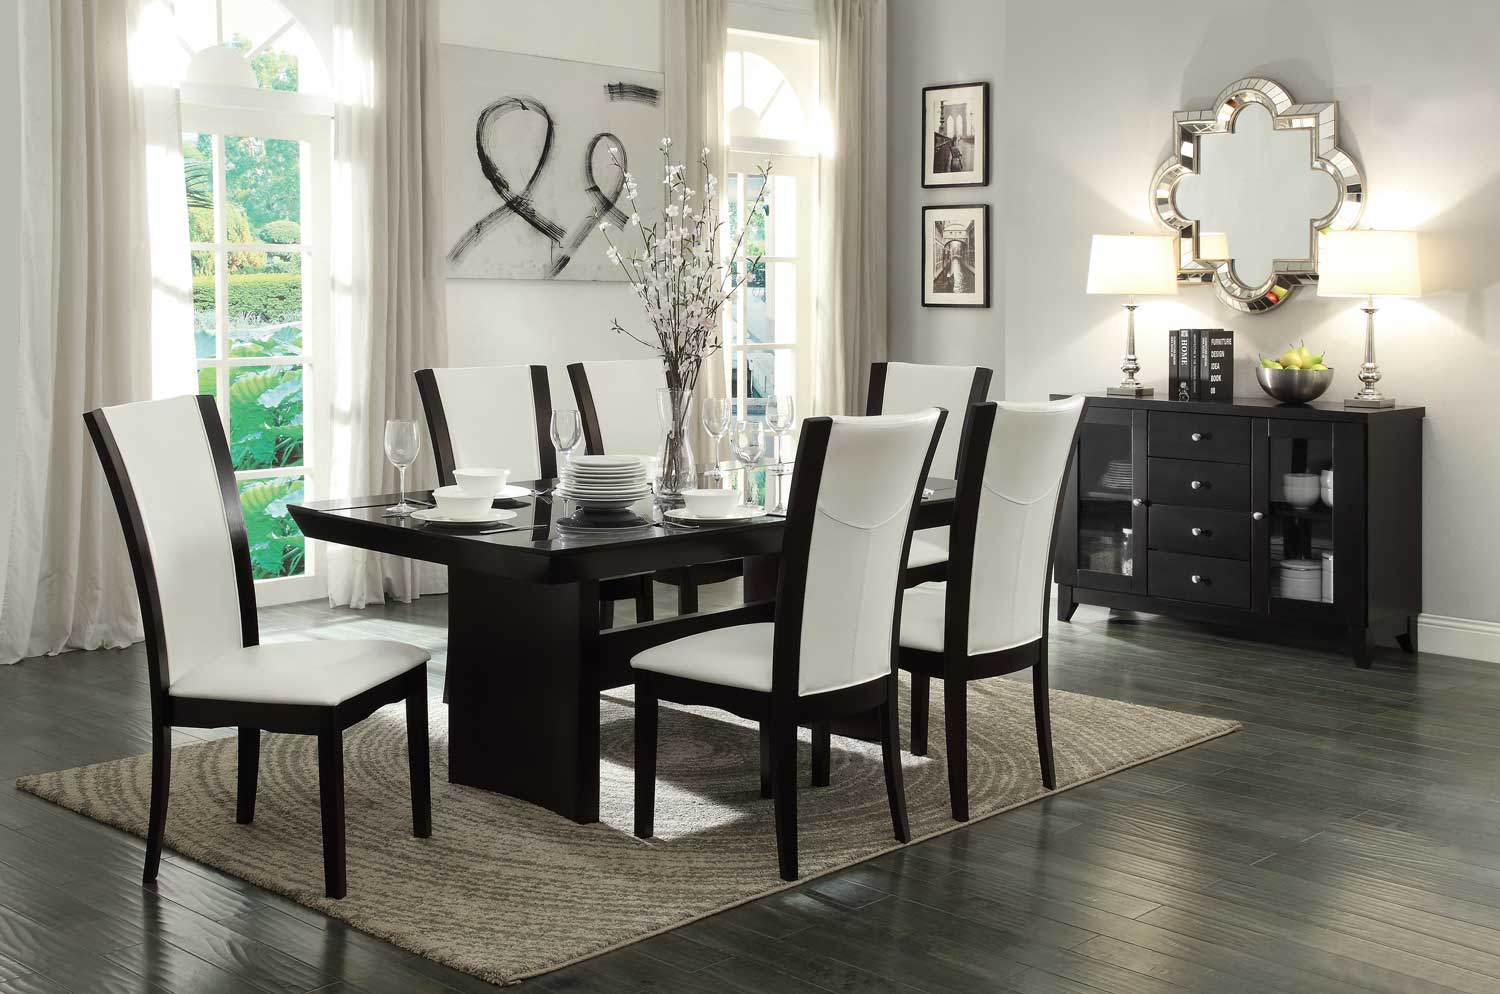 Homelegance Daisy Dining Table With, Dining Room Table With Insert